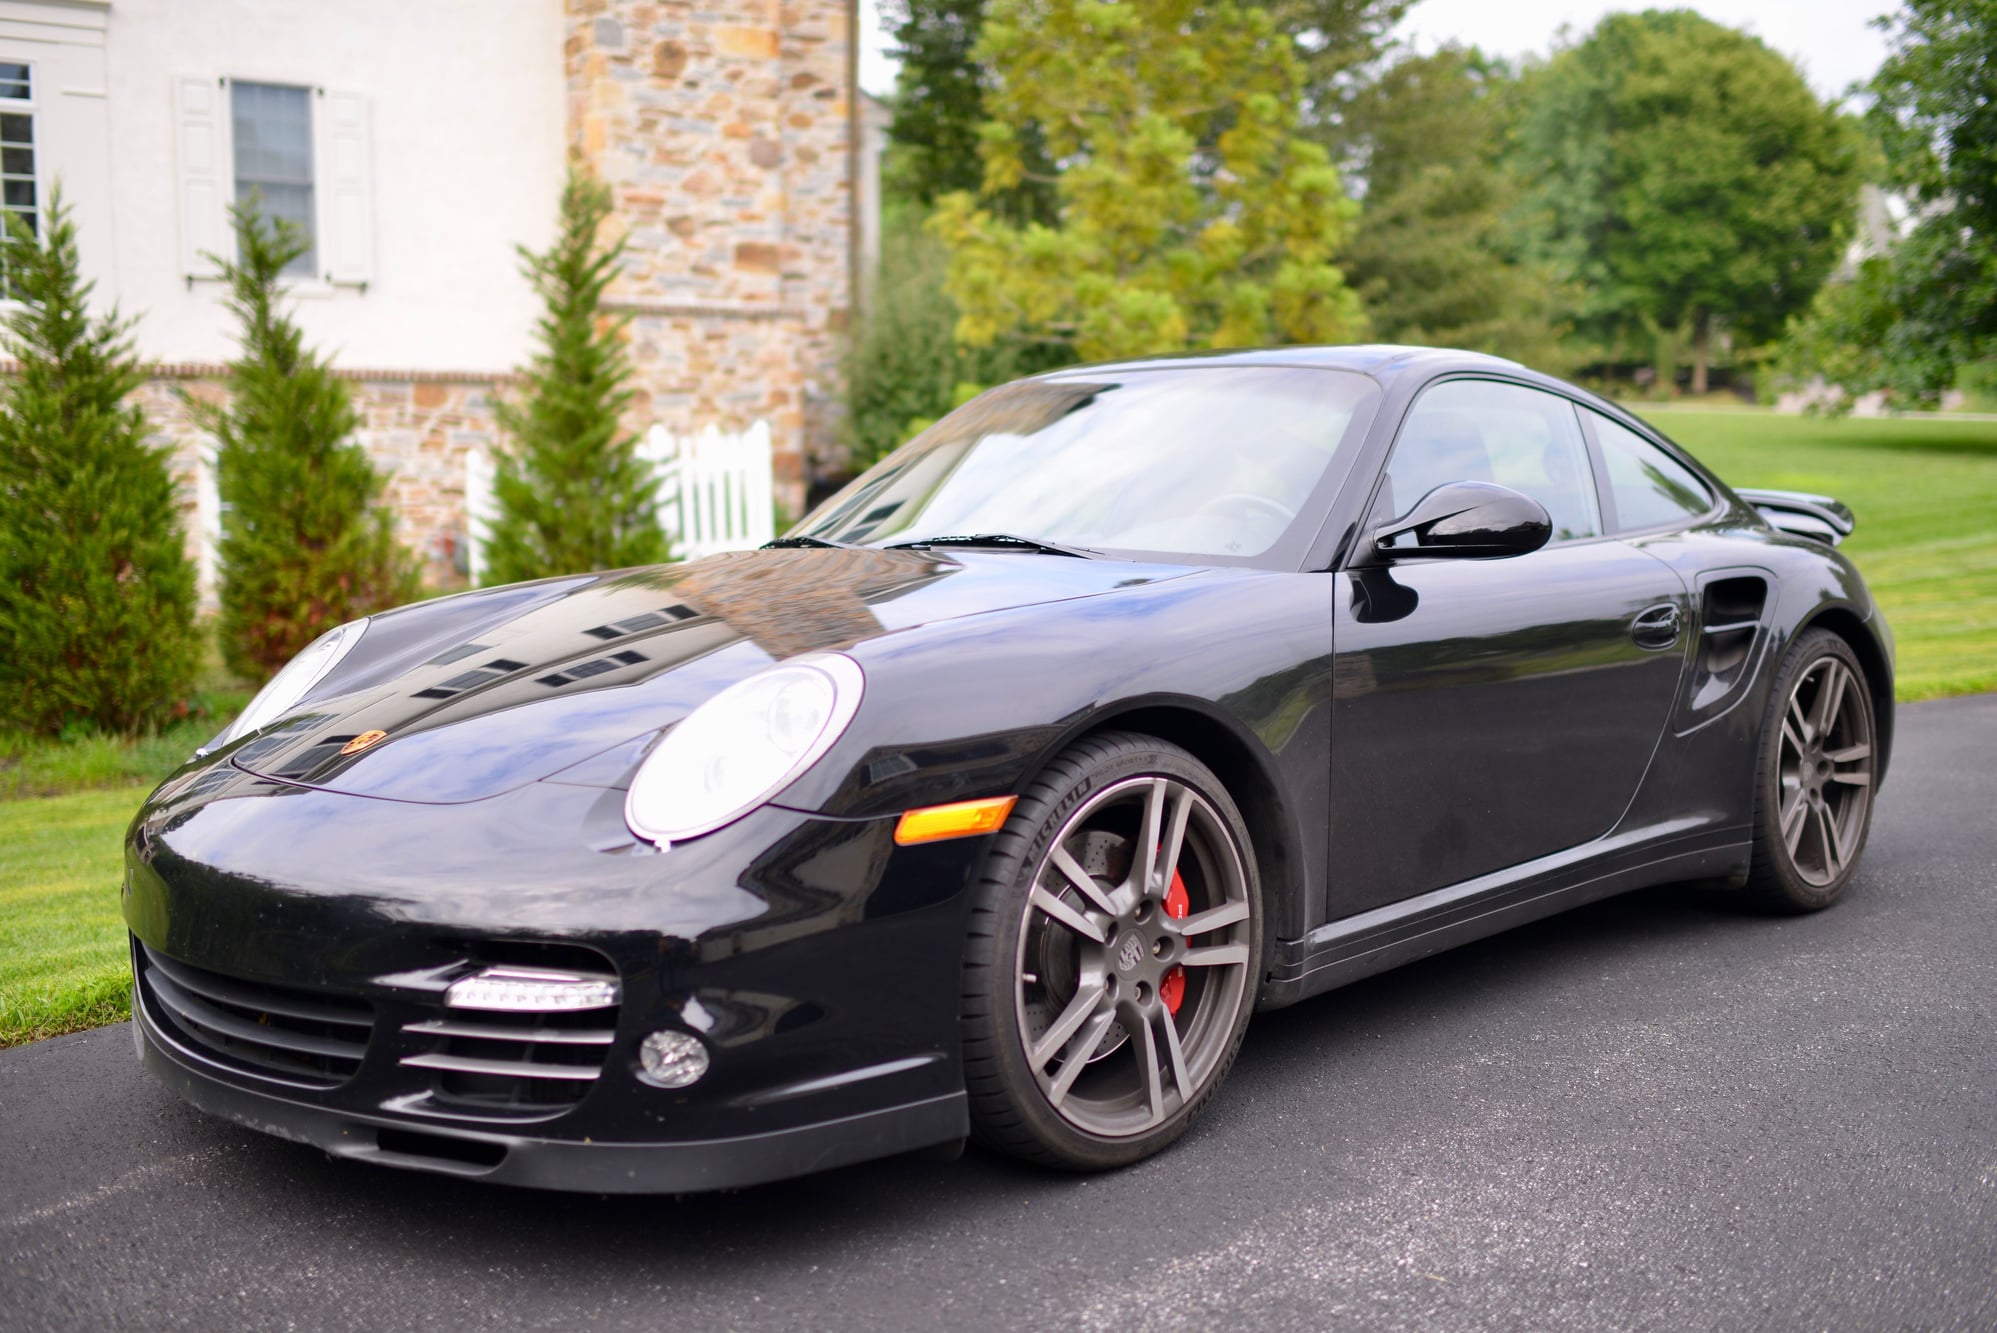 2010 Porsche 911 - 2010 911 Turbo Coupe for Sale - Used - VIN WP0AD2A97AS766198 - 59,433 Miles - 6 cyl - 4WD - Automatic - Coupe - Black - Greenville, DE 19807, United States